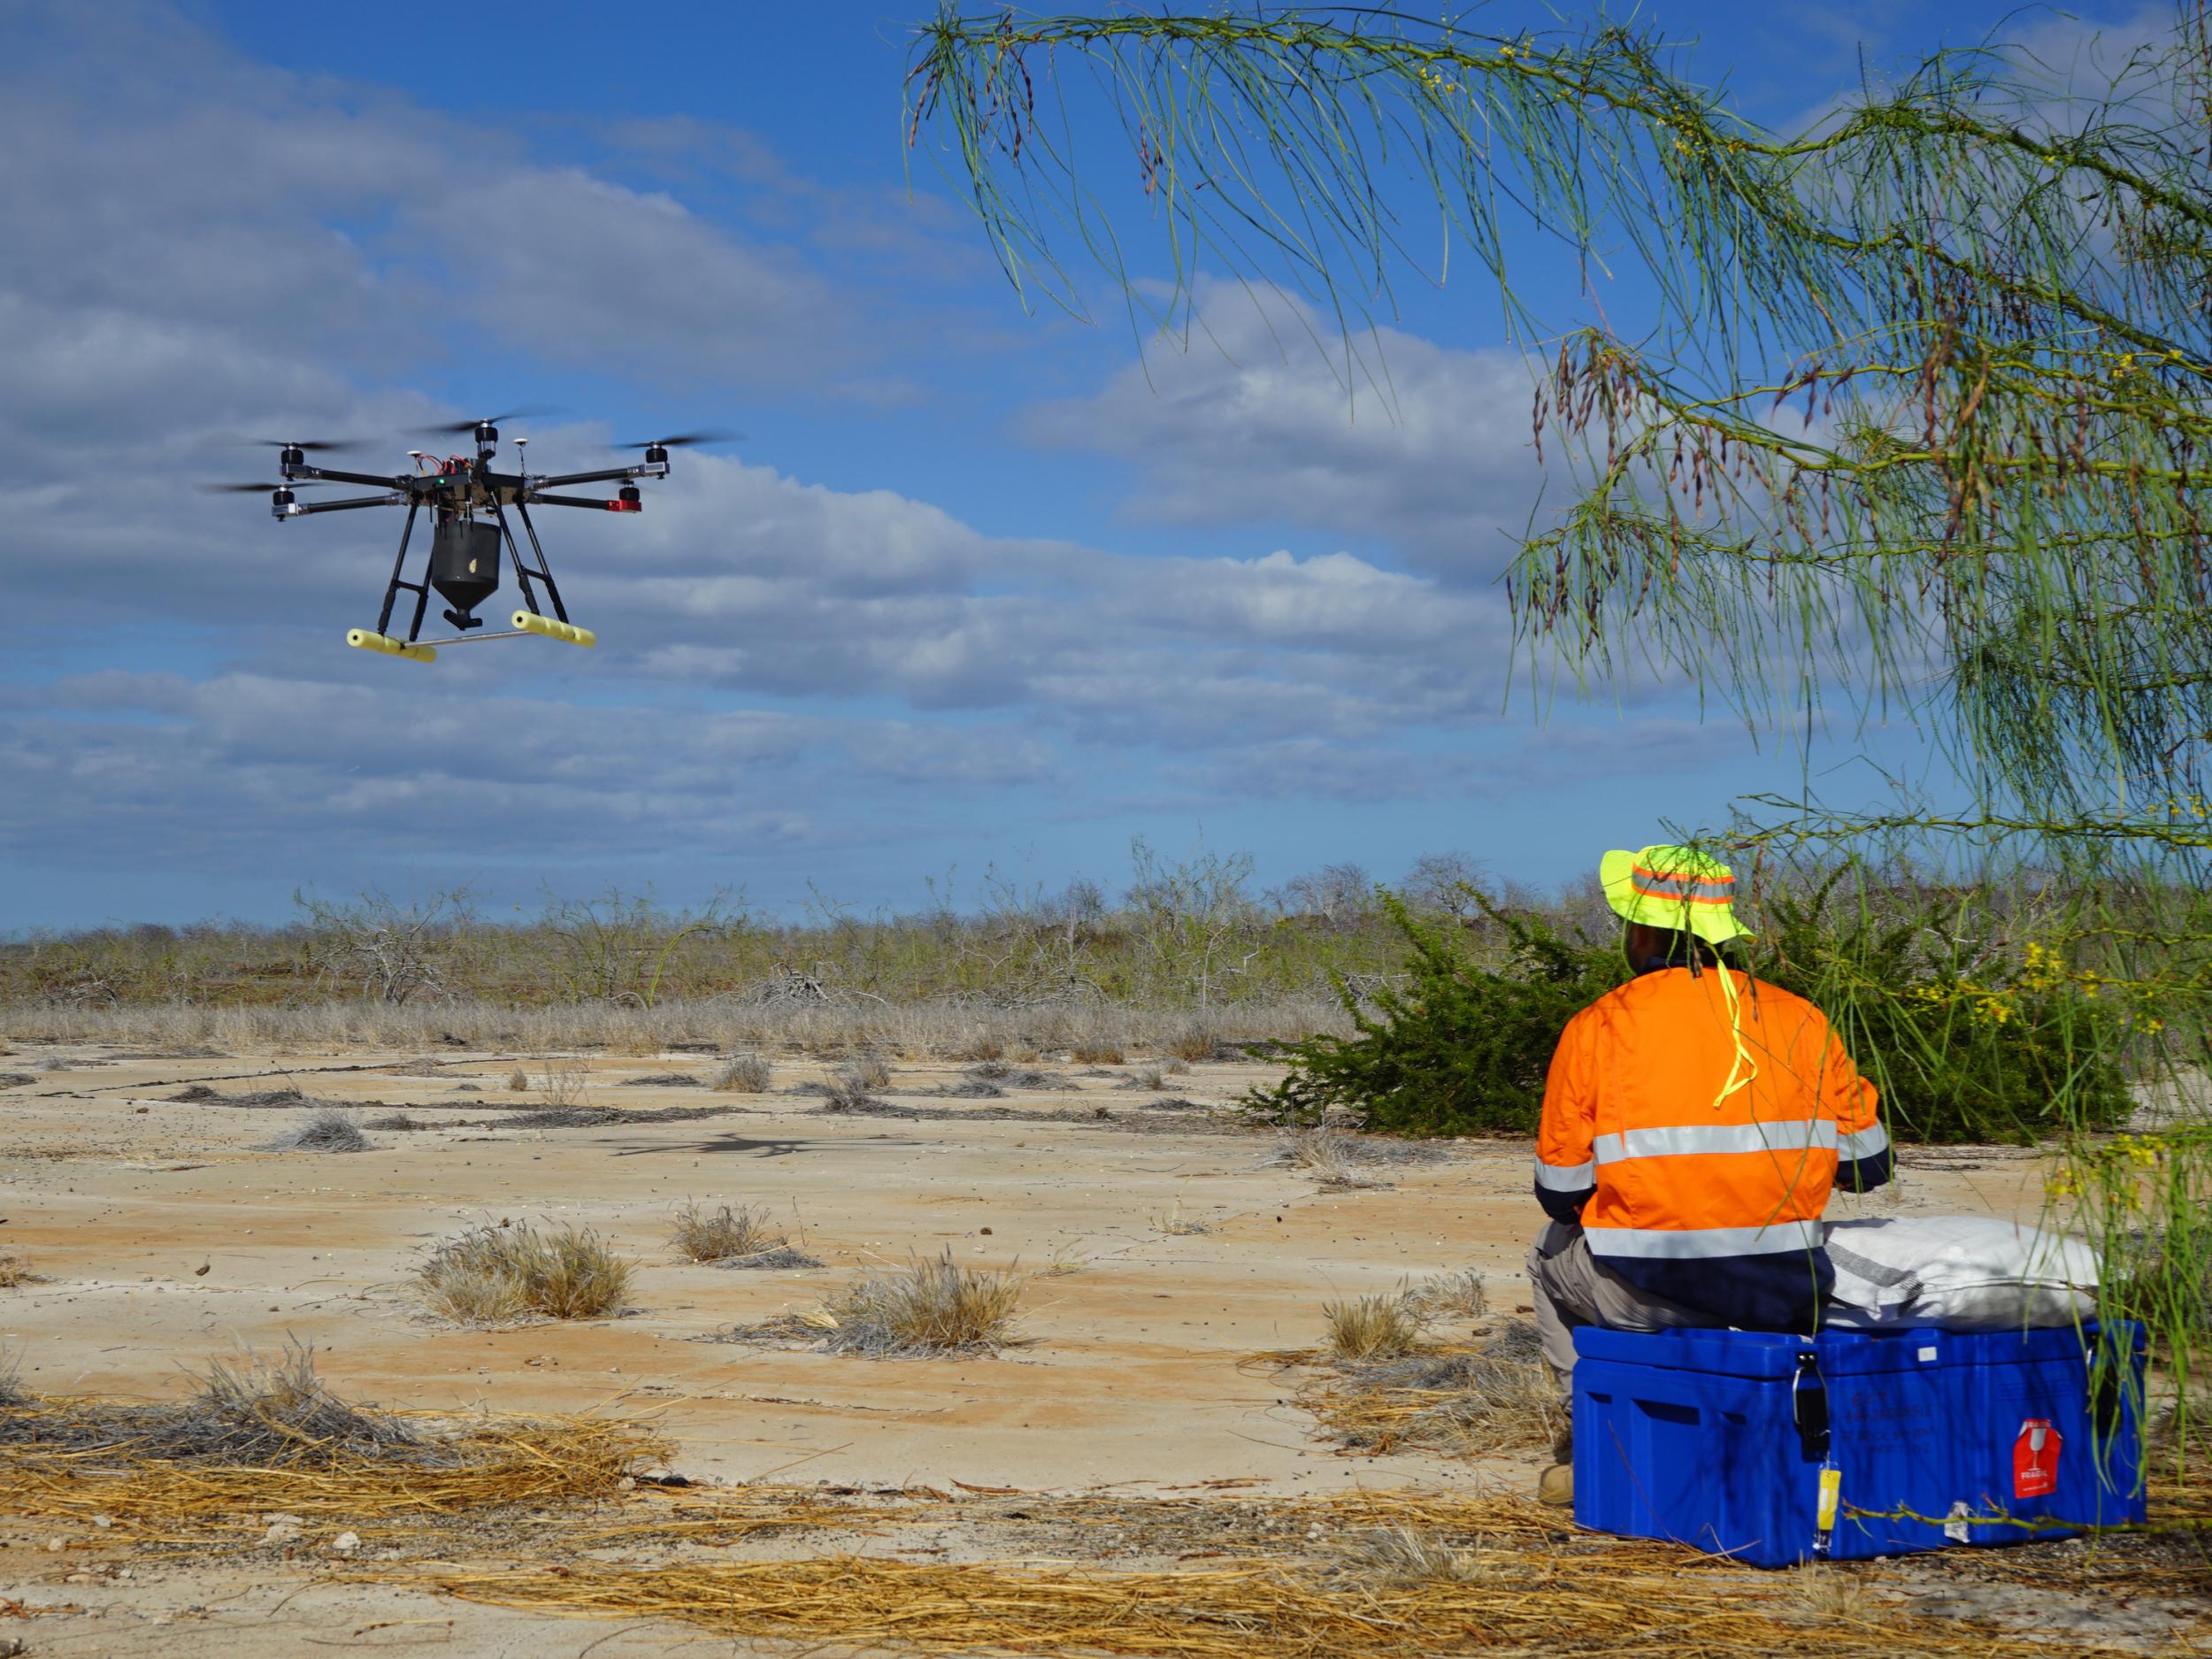 The drones can cover large areas of the island with relative ease